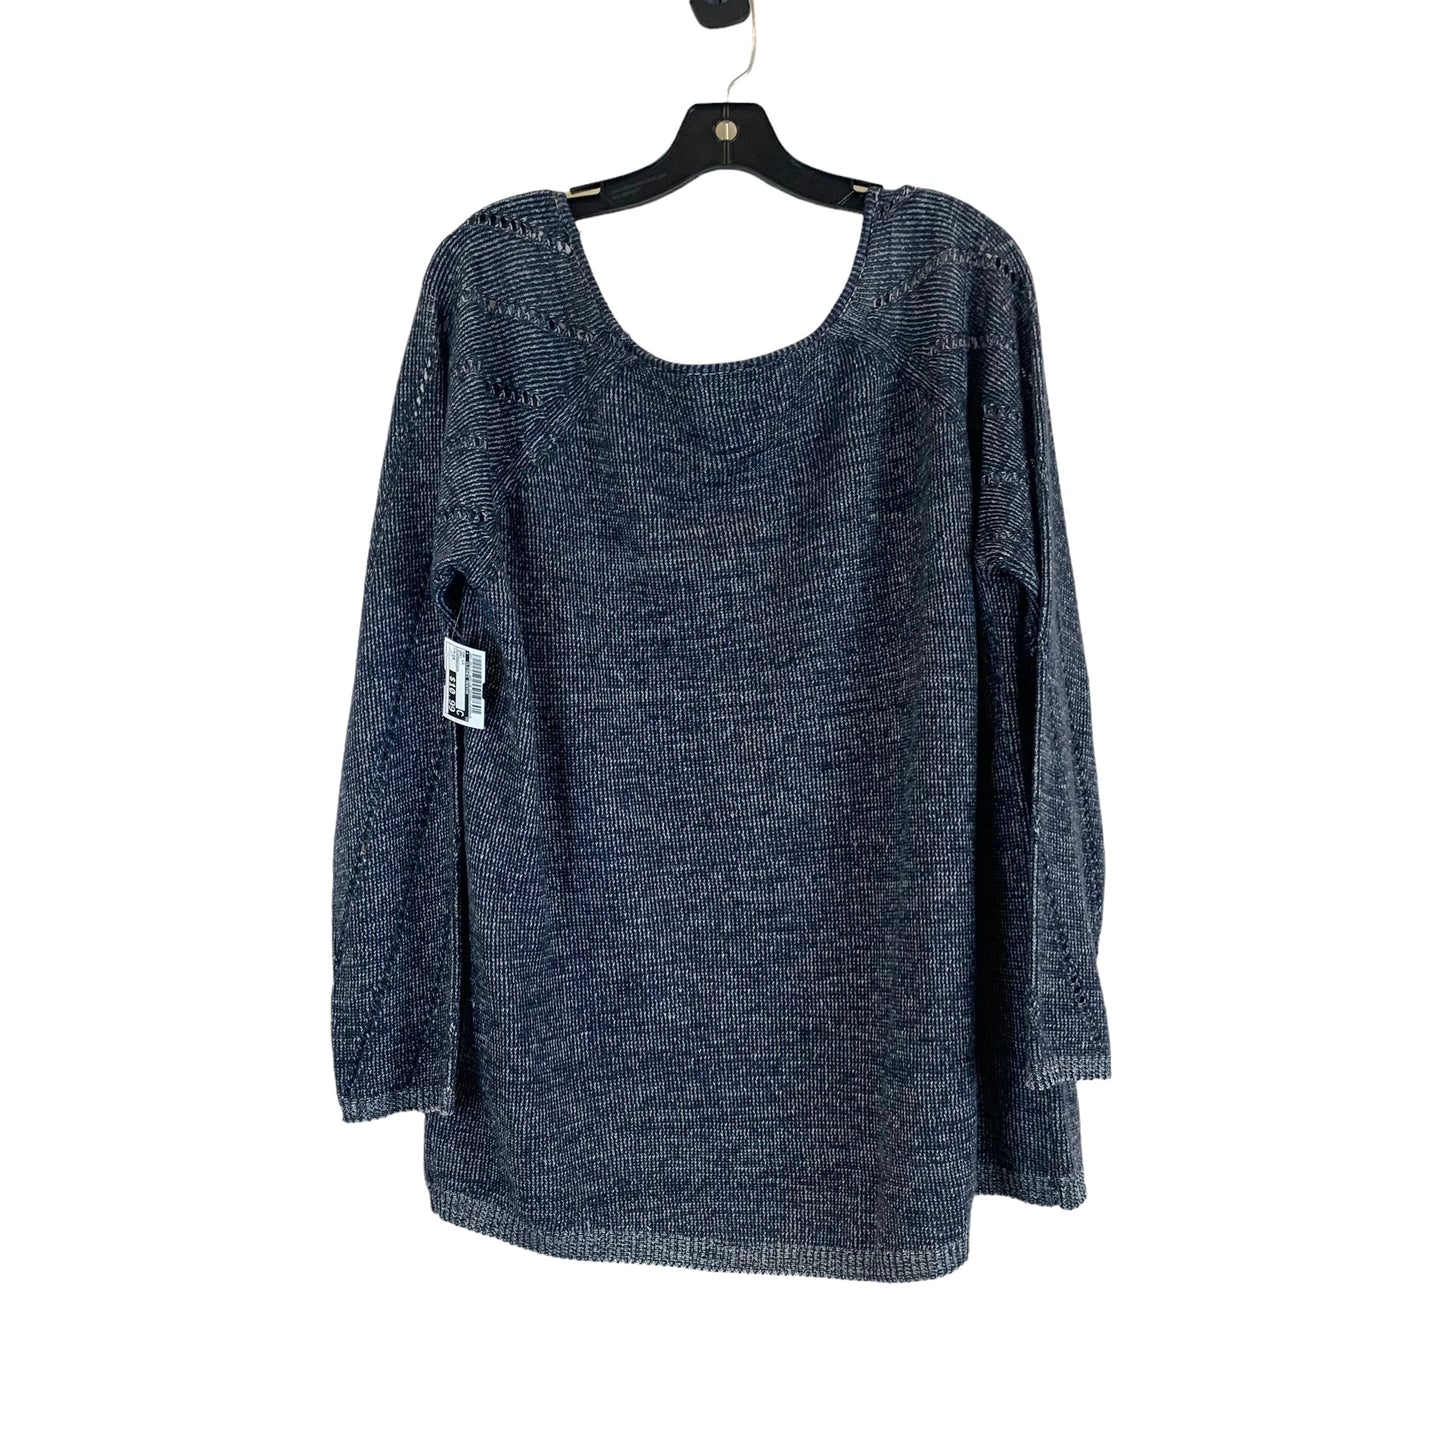 Top Long Sleeve By Clothes Mentor  Size: 1x